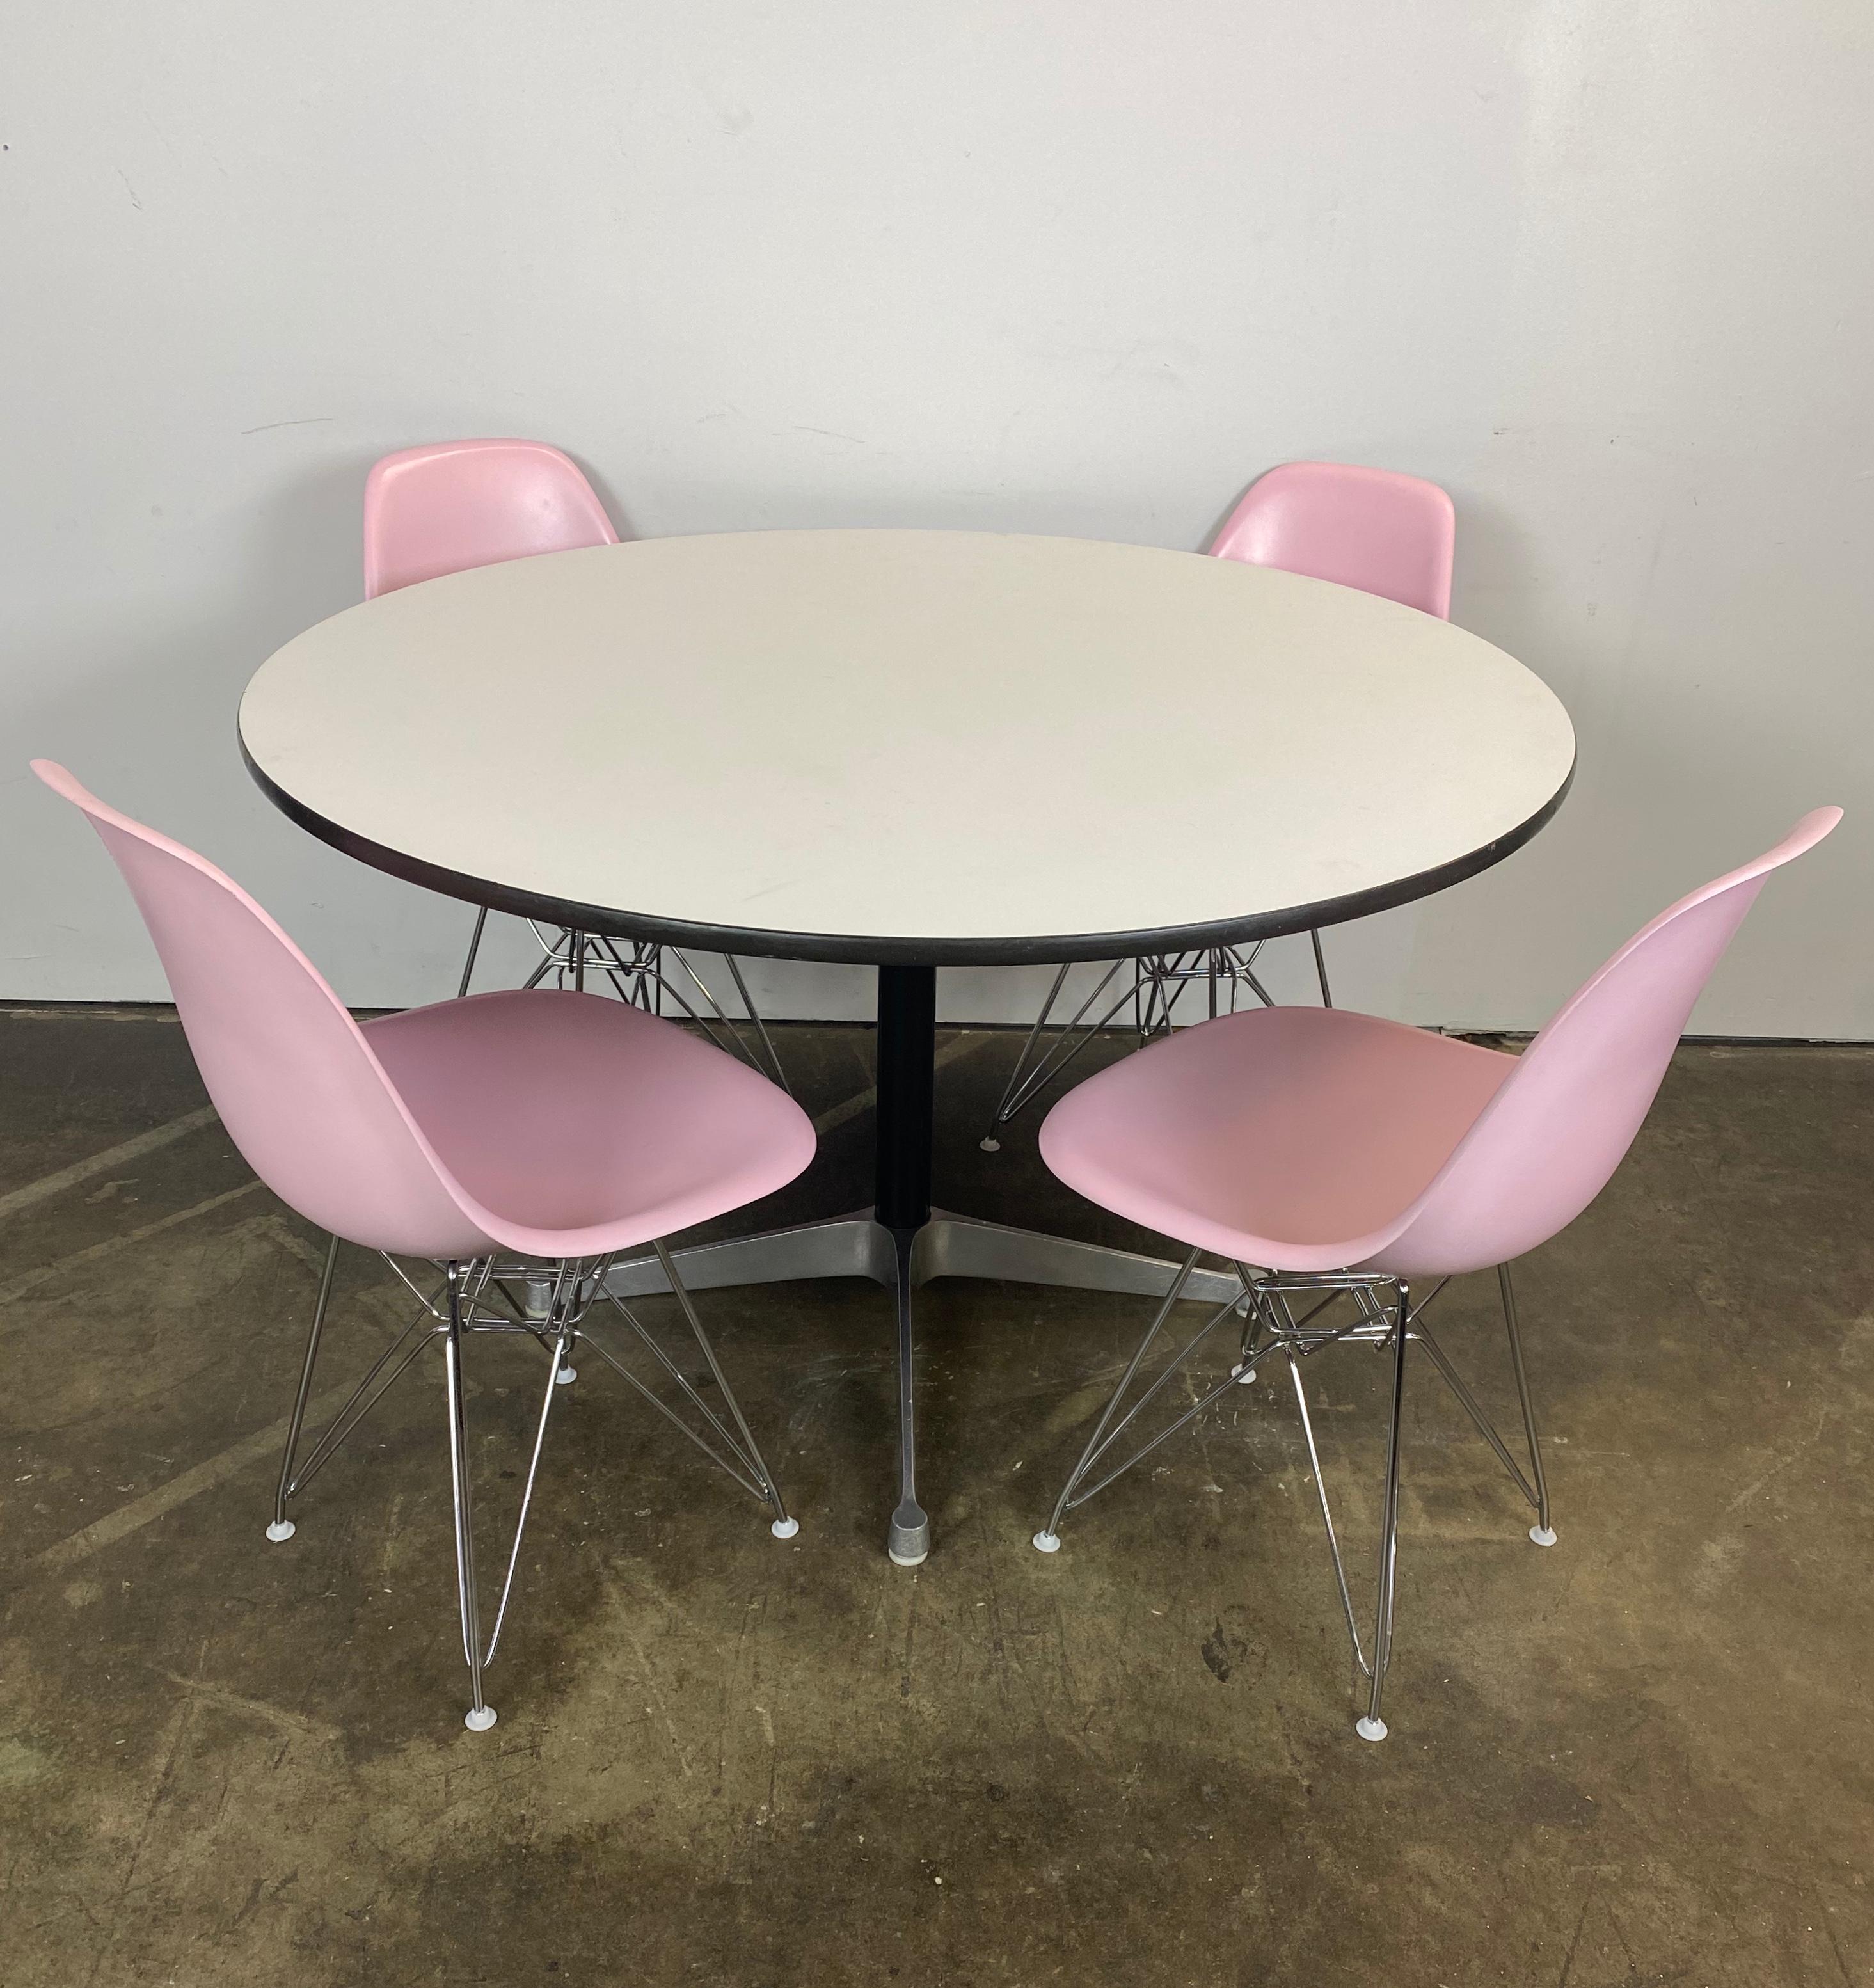 Gorgeous Herman Miller Eames dining set. Featuring 4 pink model DSR chairs, recoated in pink and atop fresh new Eiffel bases. All chairs signed Herman Miller and guaranteed authentic. Nylon floor glides allow for use on multiple floor surfaces. All